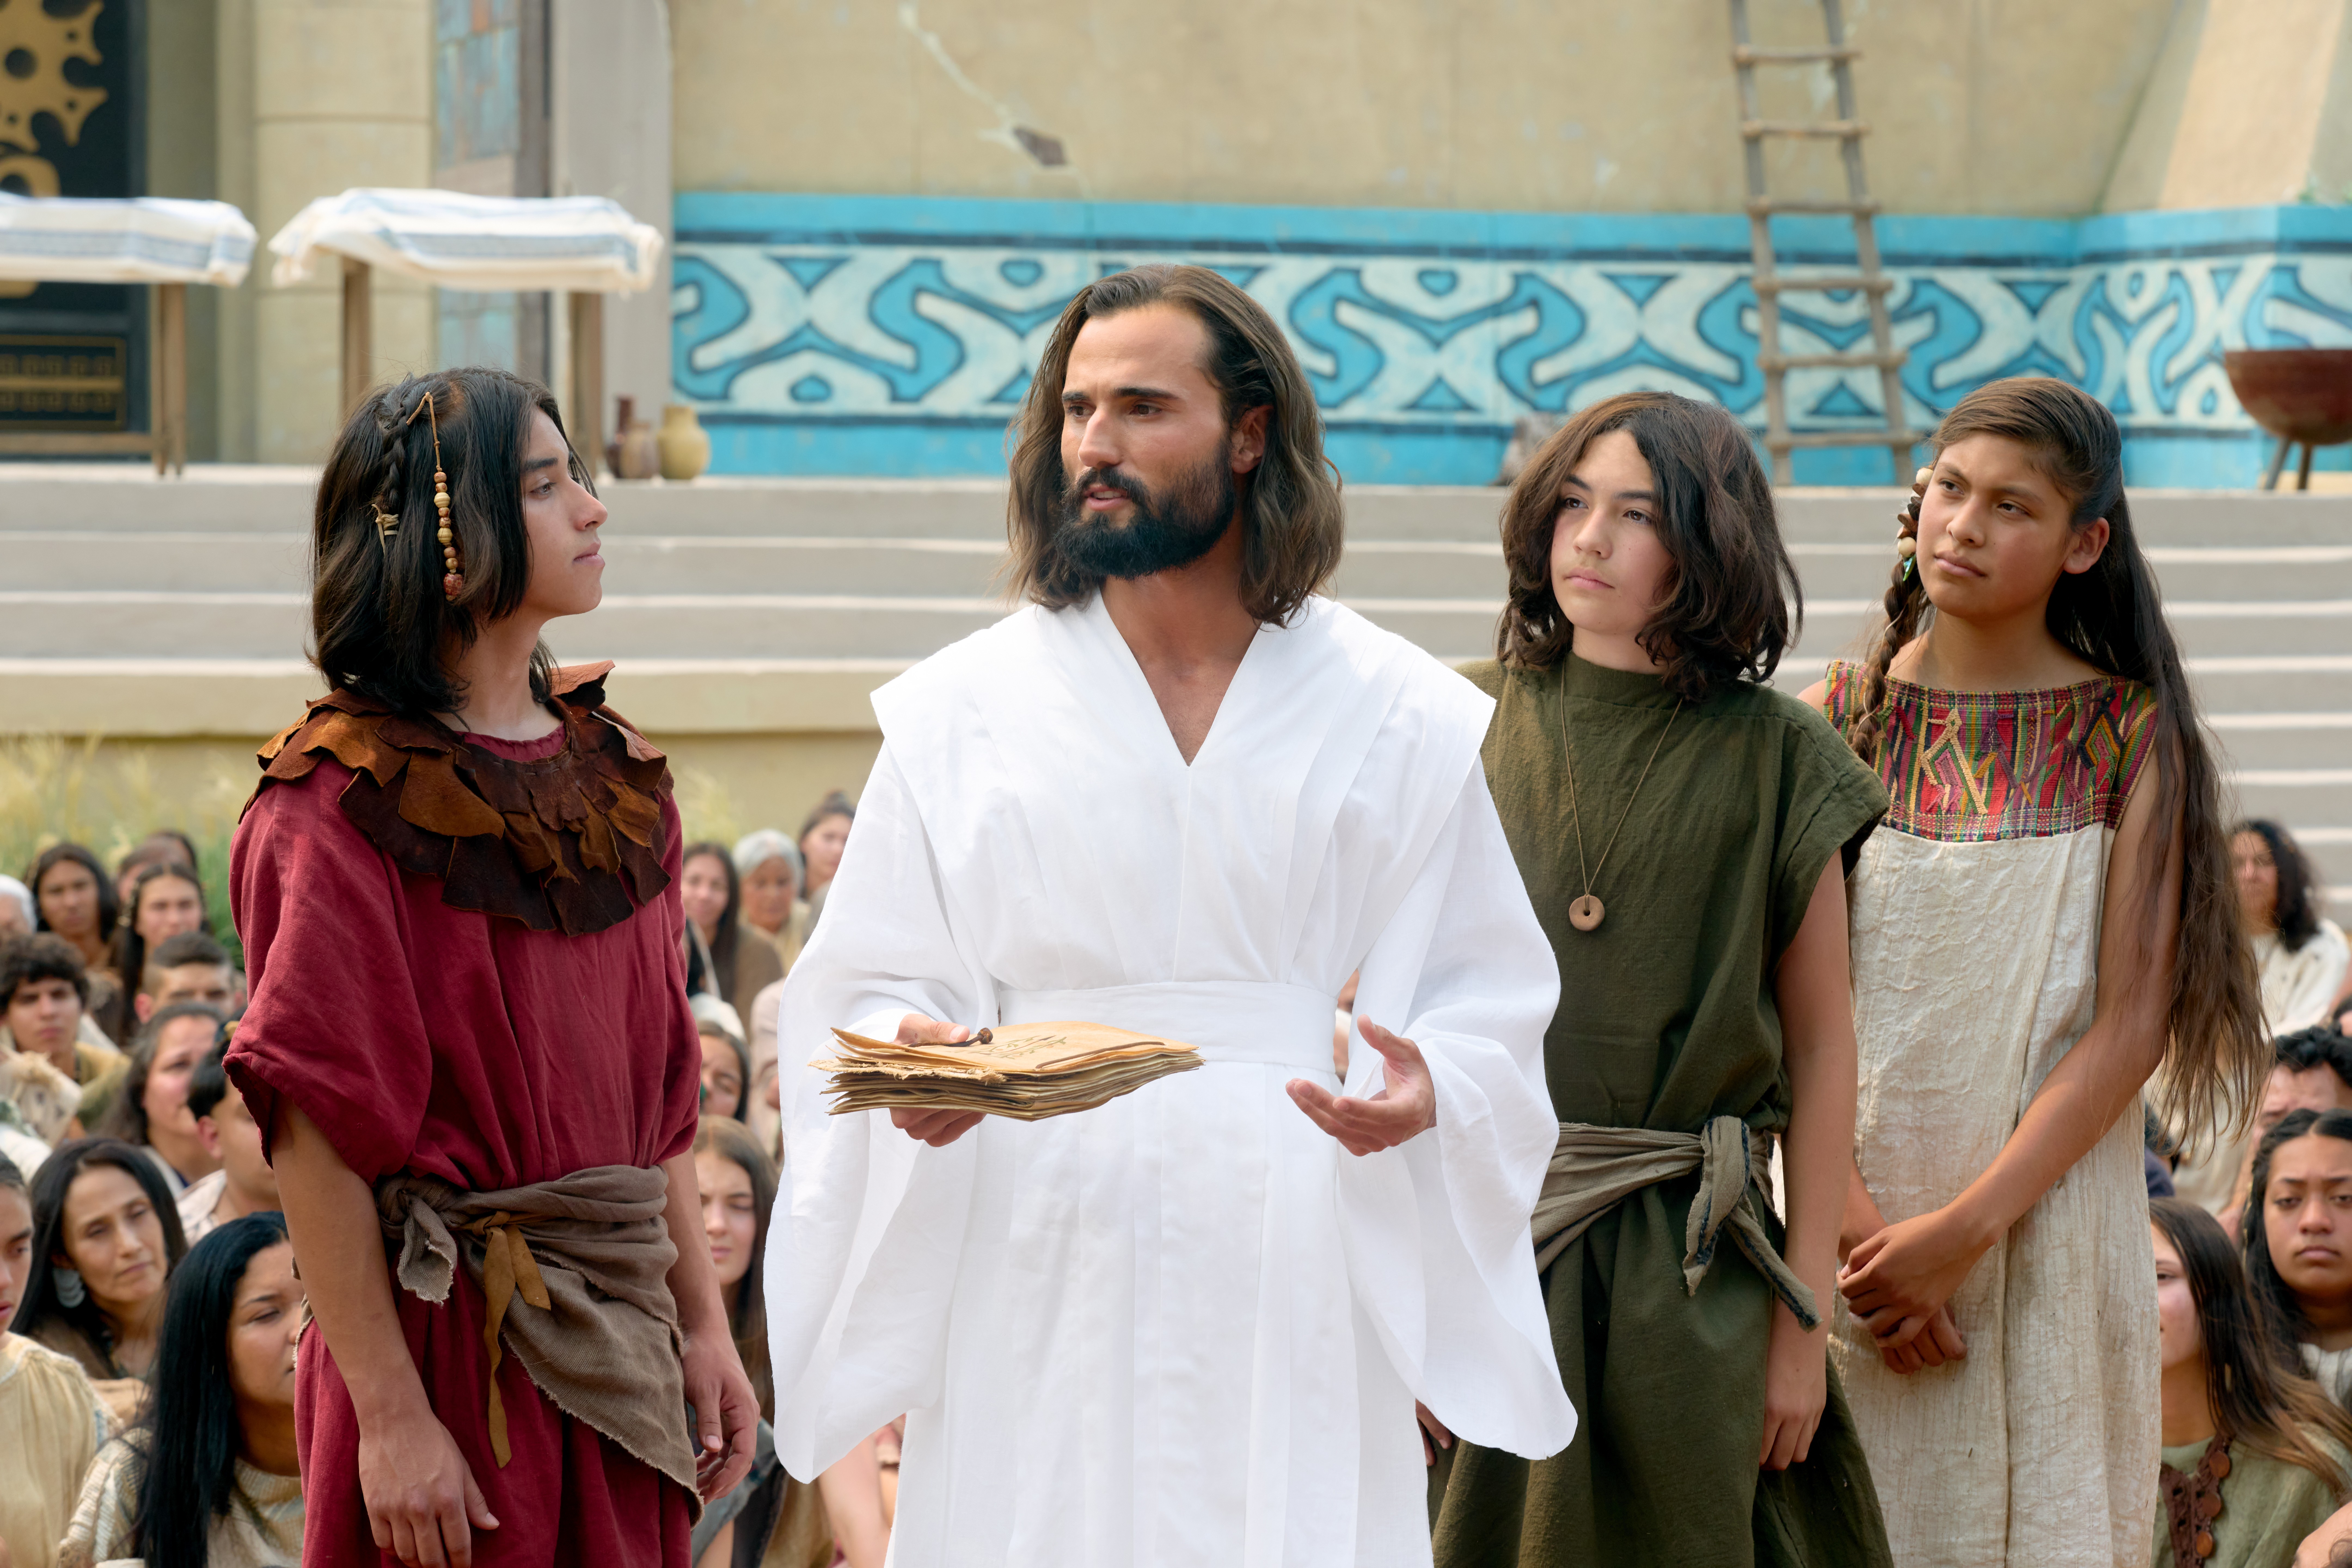 The resurrected Savior, Jesus Christ, appears to the ancient inhabitants of the Americas and teaches them his Gospel. Three youth are standing by his side as he holds writings in his hands.